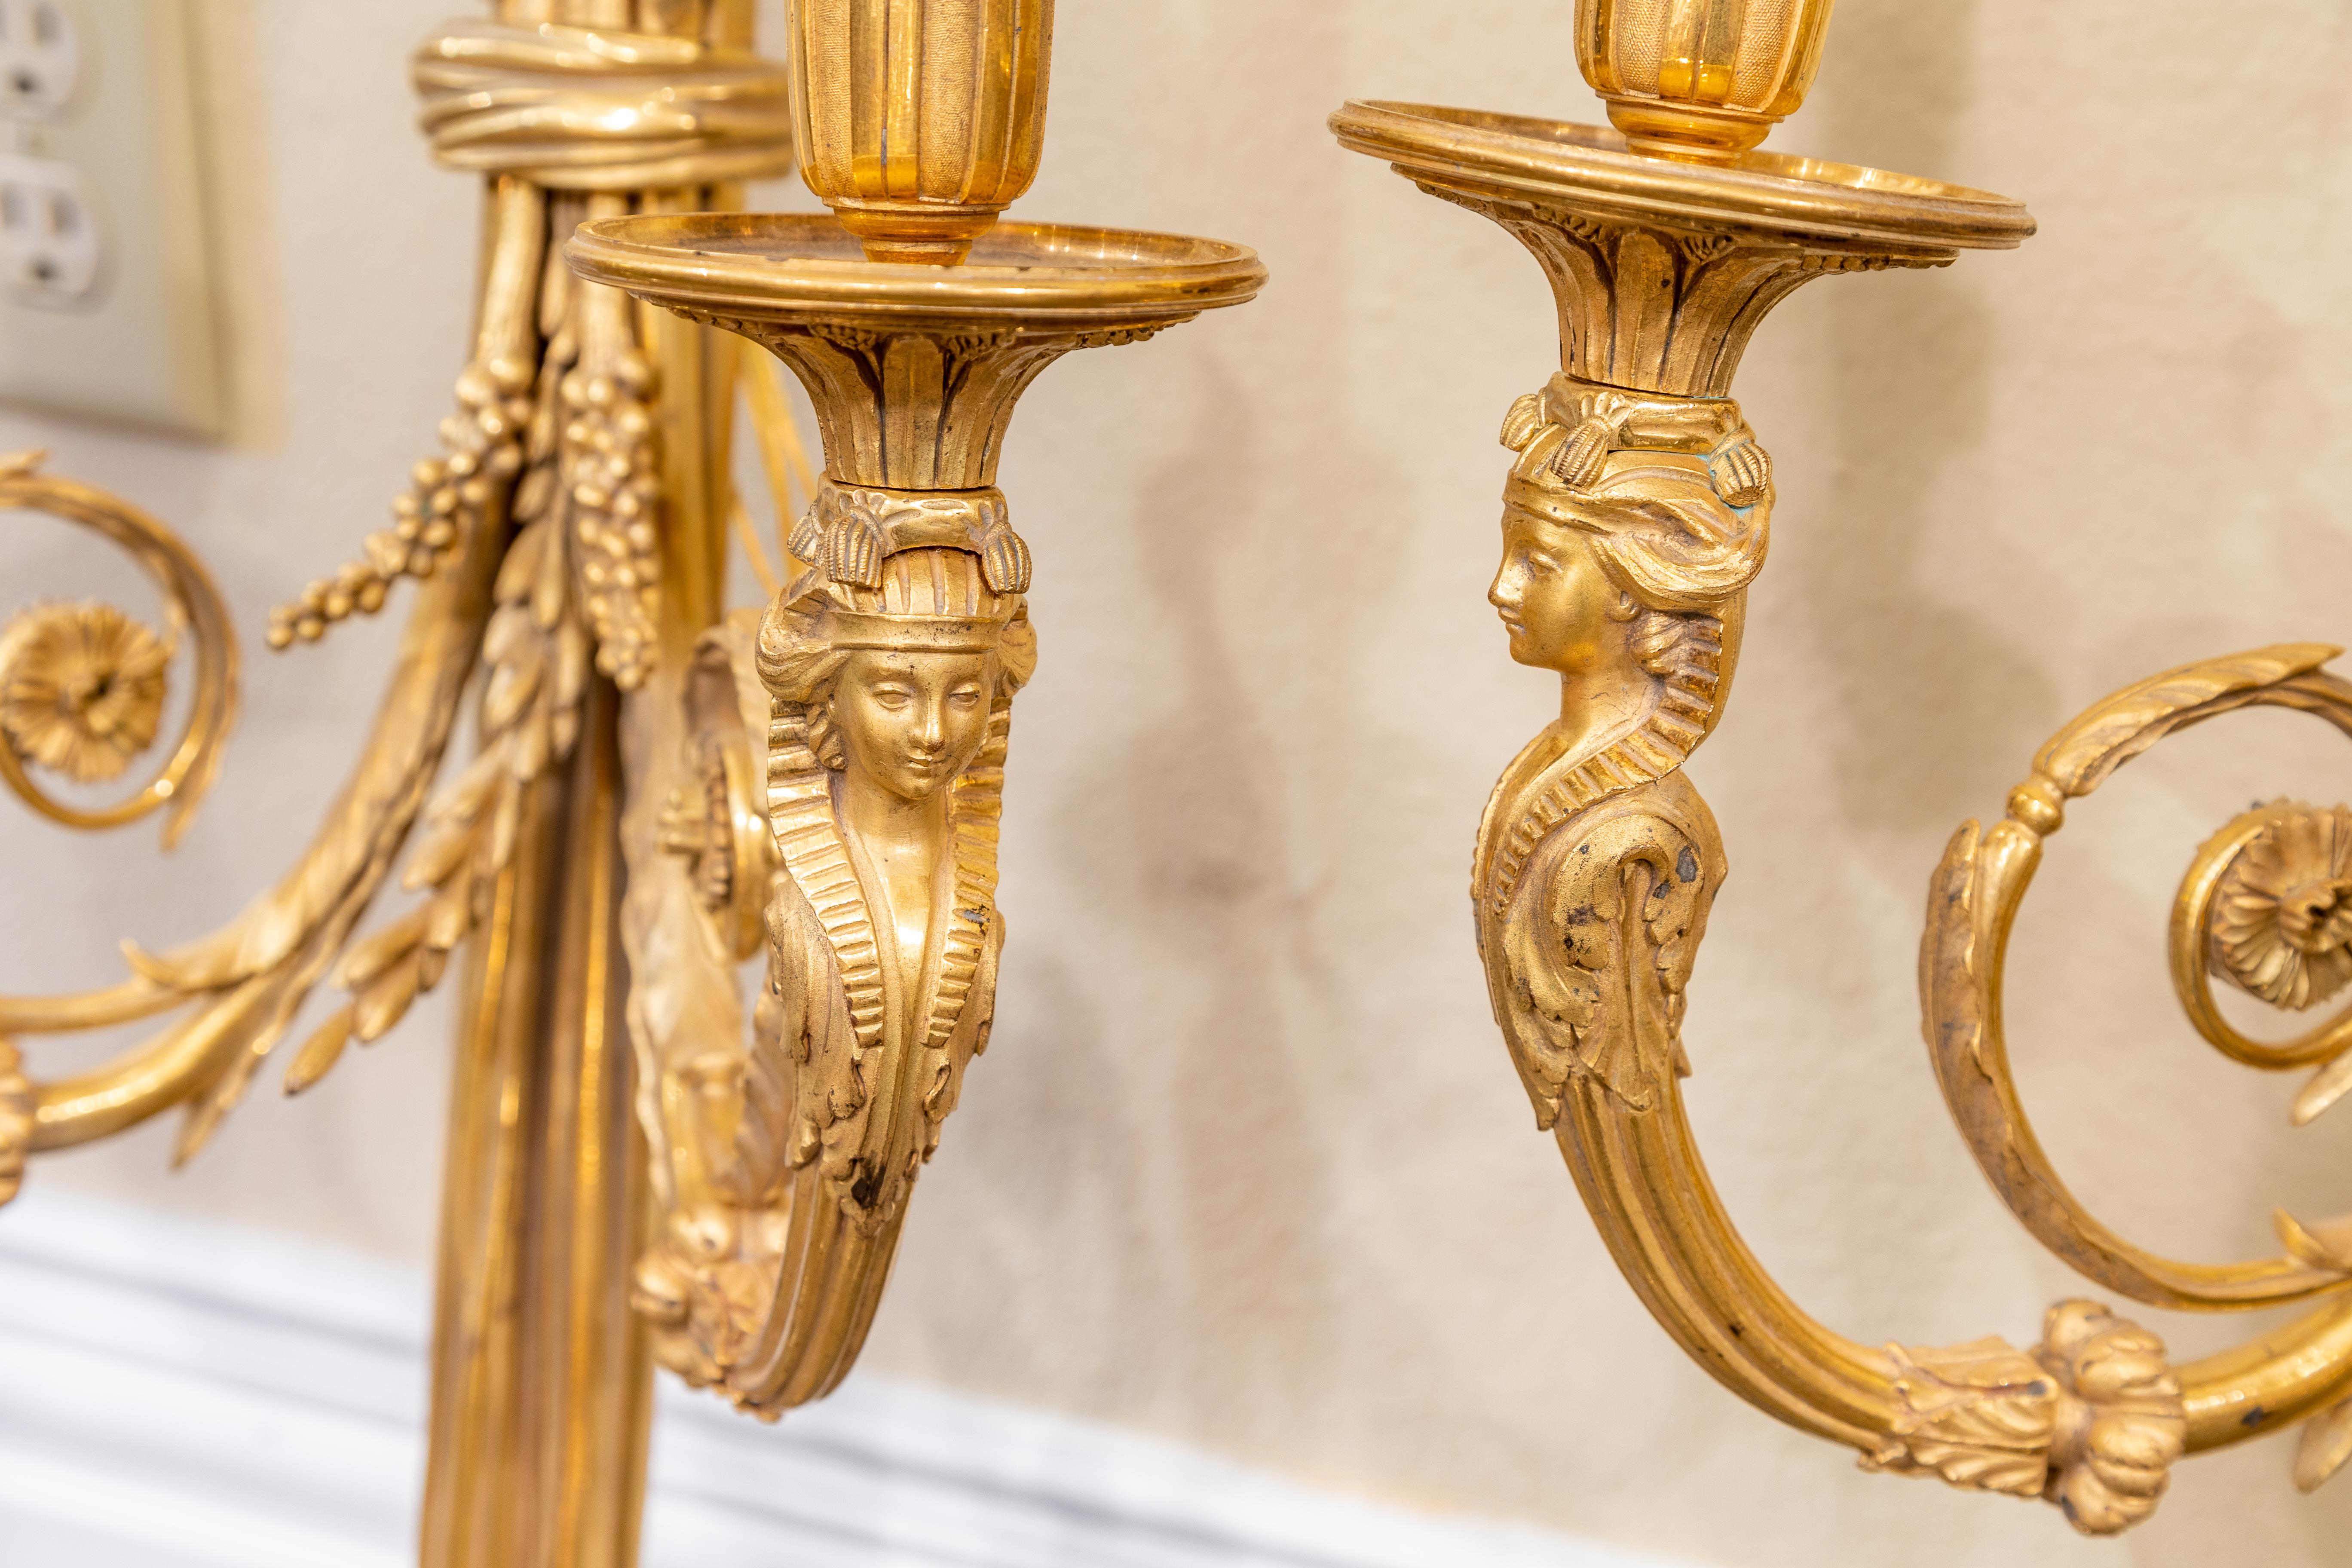 Extremely Fine Pair of Large 19th C French Empire Gilt Bronze Sconces In Good Condition For Sale In Dallas, TX